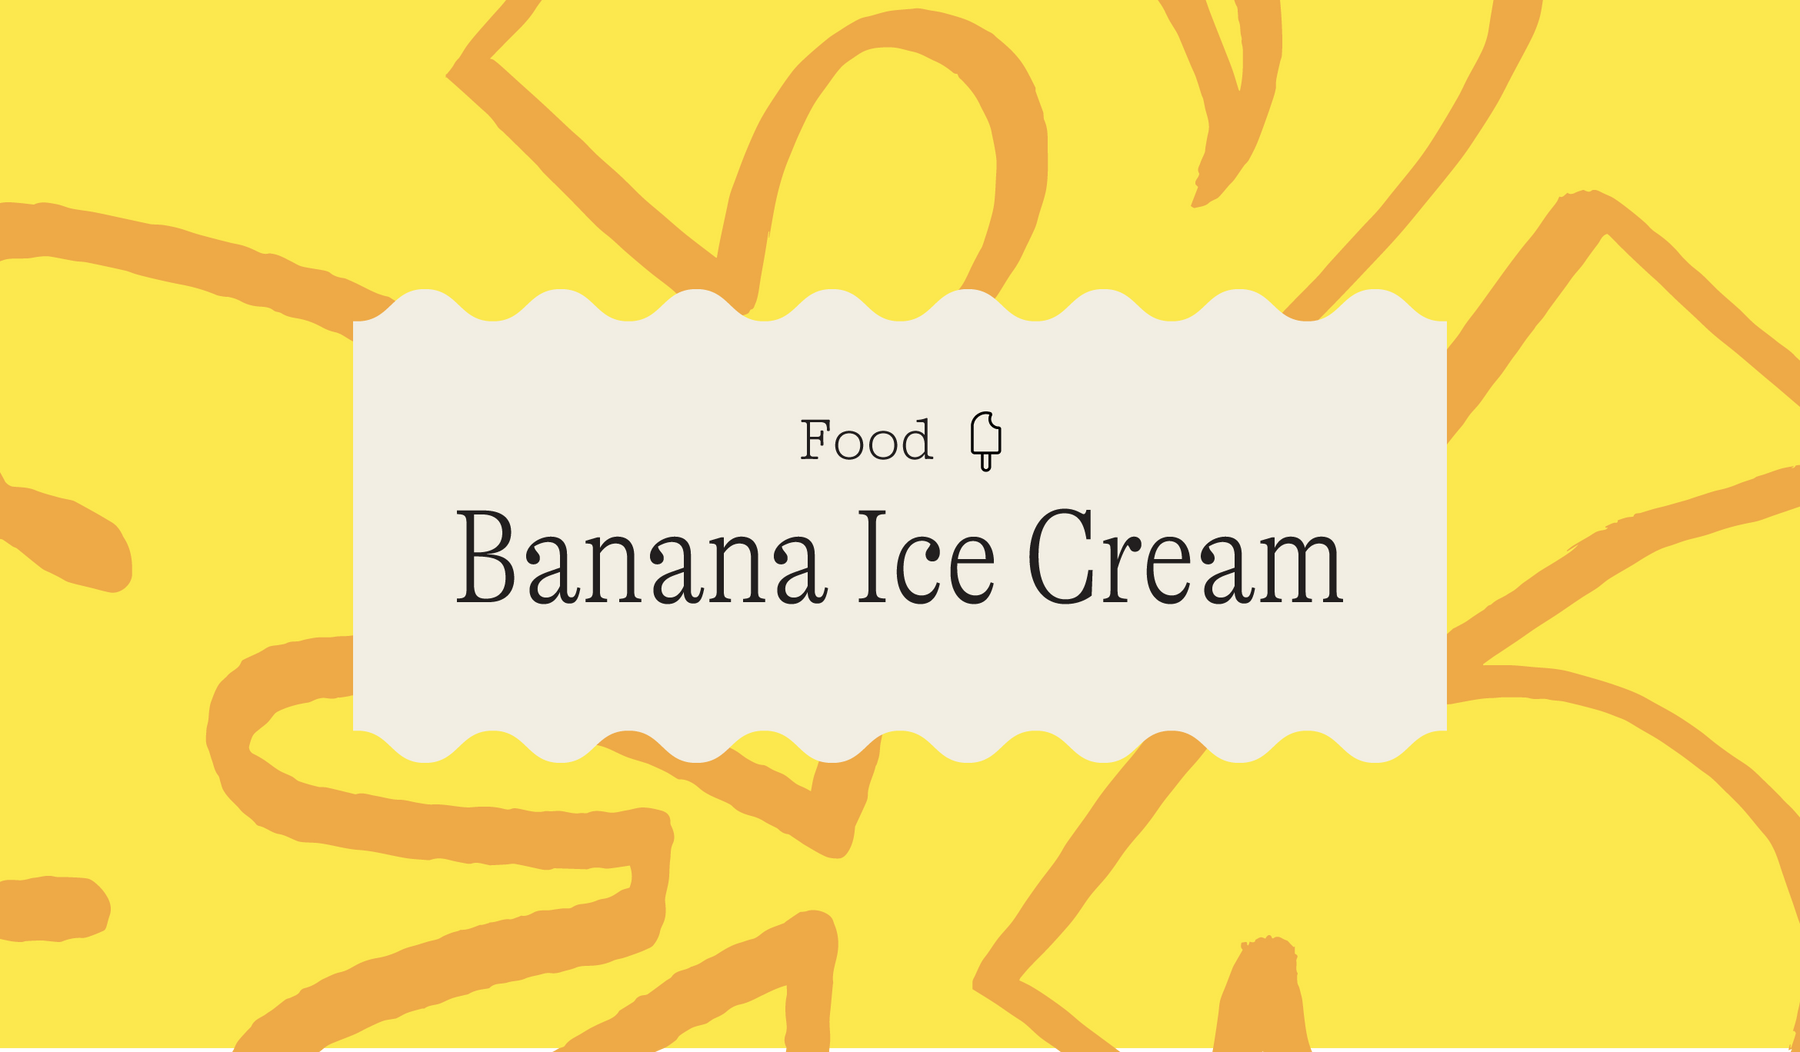 Primary Color Camp: The Easiest 1-Ingredient Banana Ice Cream